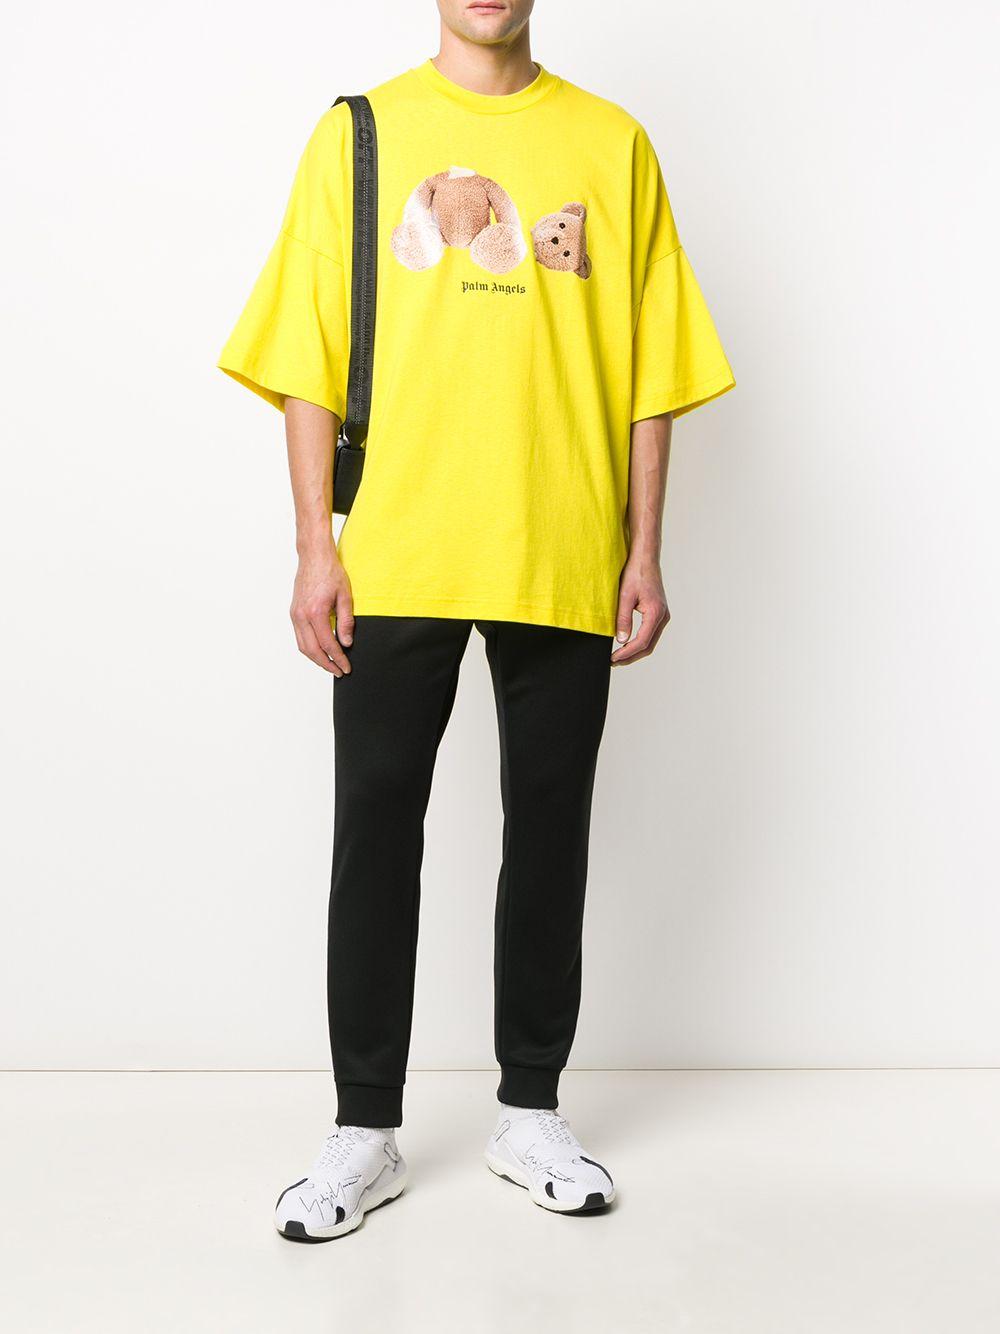 Palm Angels Teddy Bear Print Oversized T-shirt in Yellow for Men 